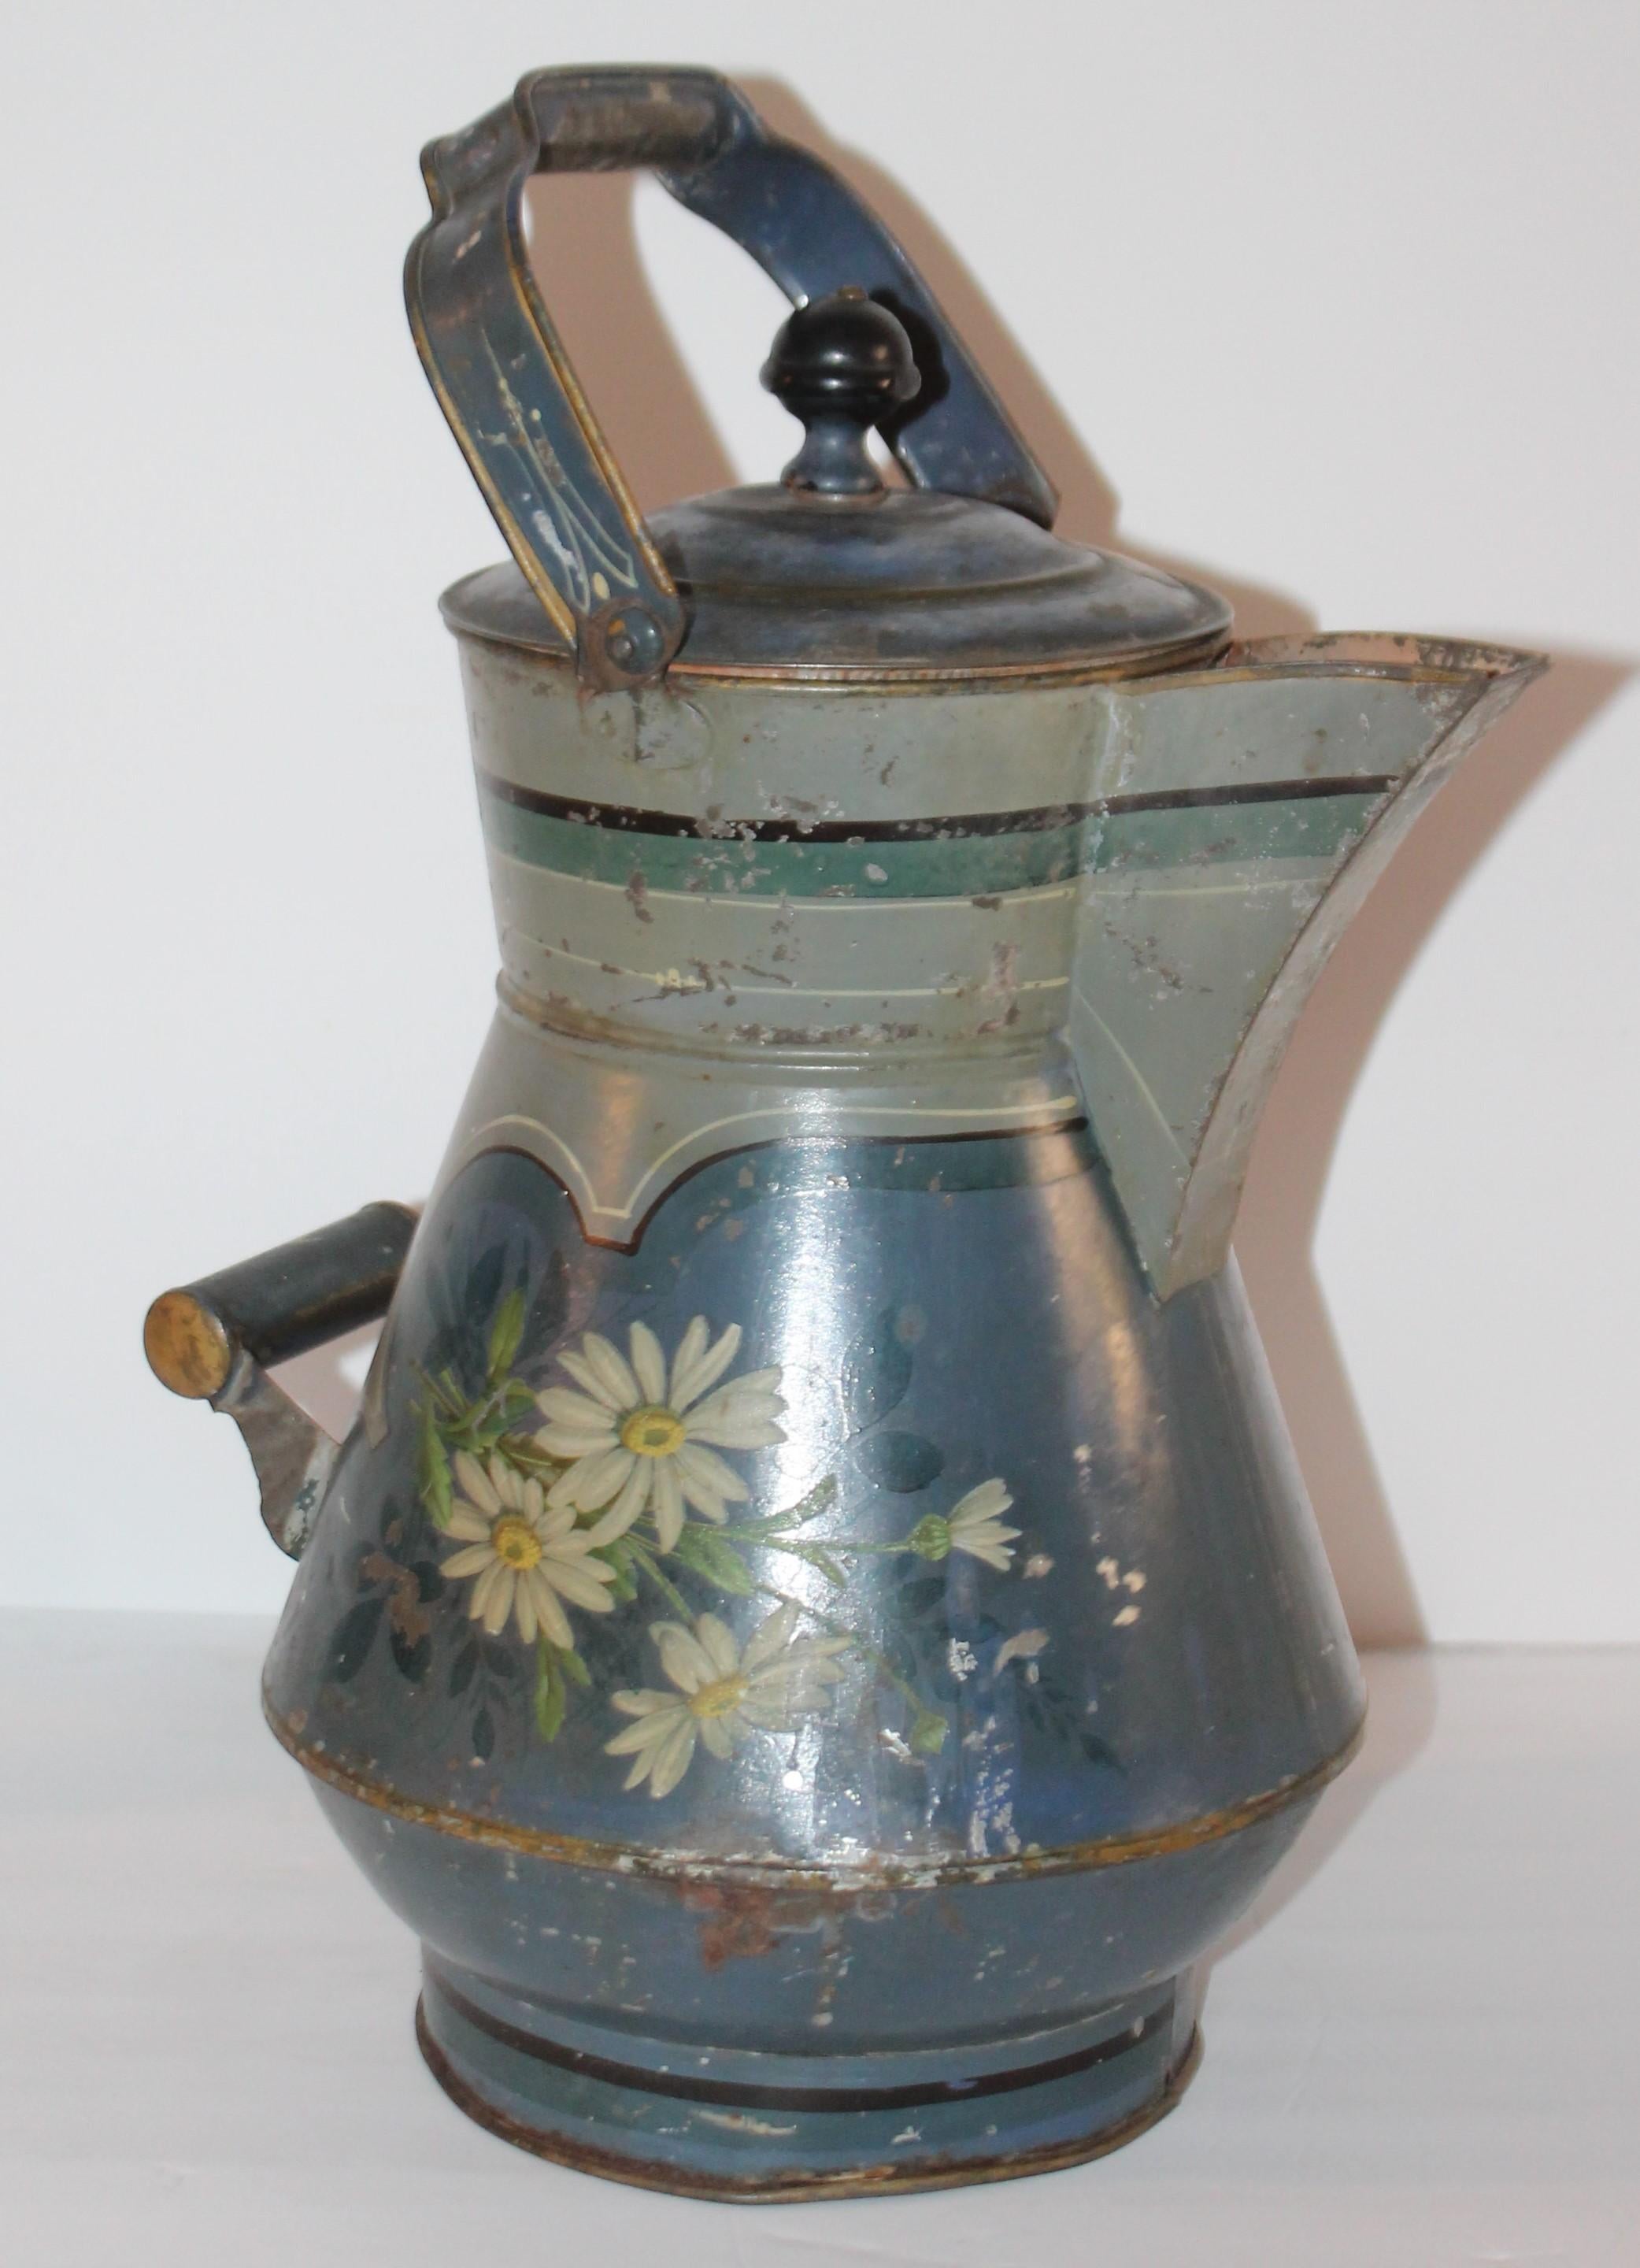 This fantastic tin blue paint decorated tole ware water kettle is in amazing as found condition. It has a blue ground with painted flowers on both sides. The interior is painted in a amazing salmon paint.